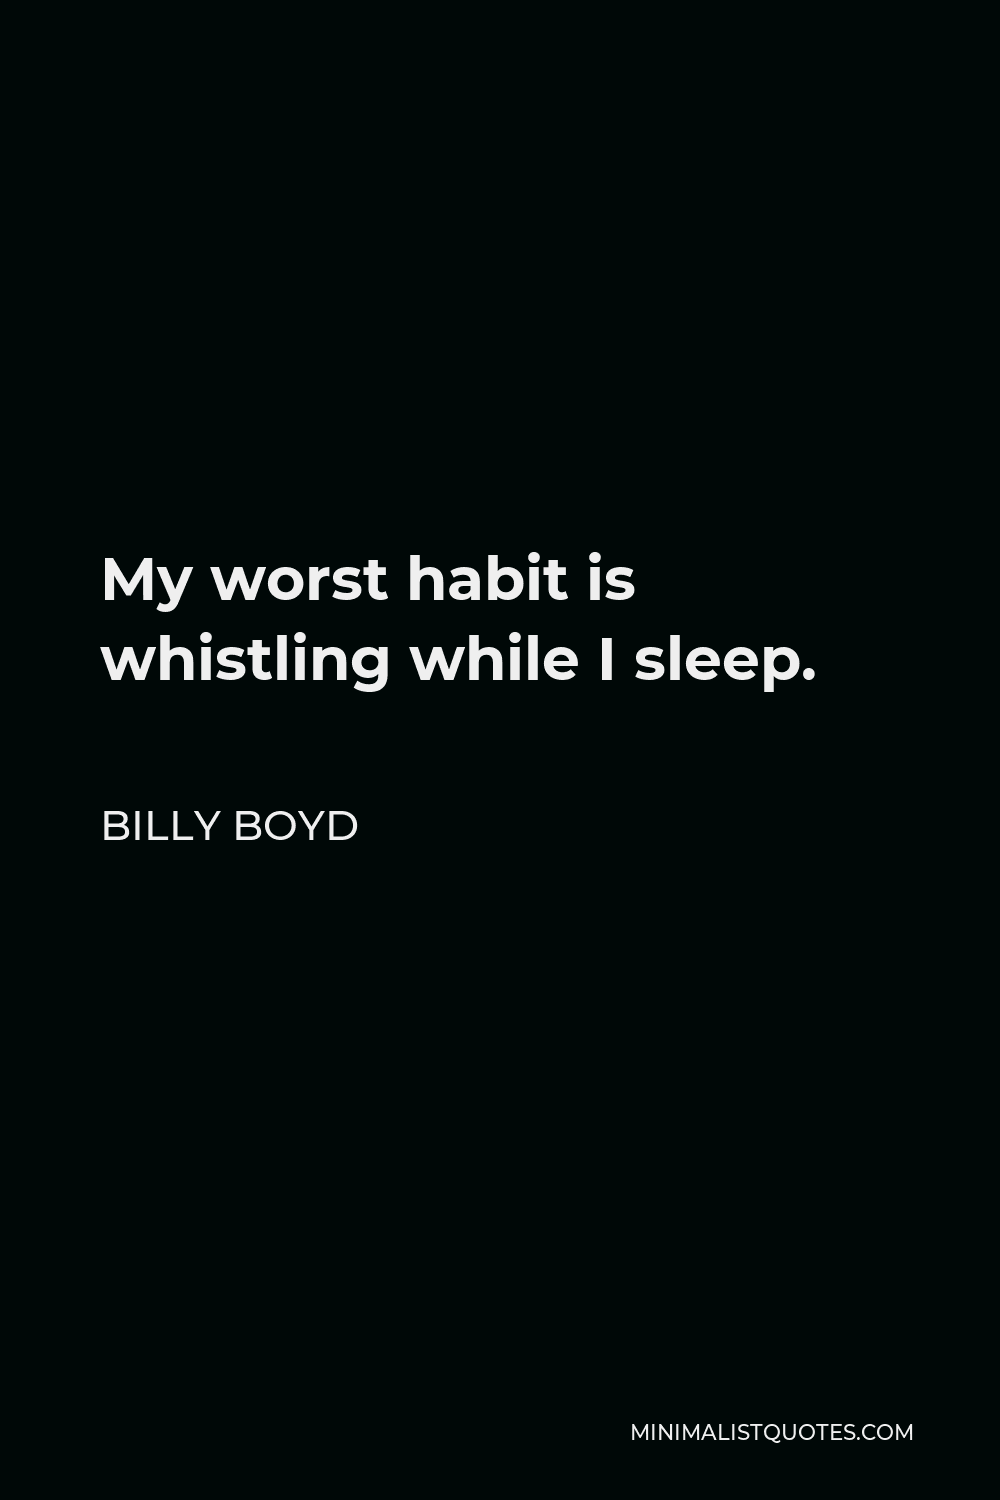 Billy Boyd Quote - My worst habit is whistling while I sleep.